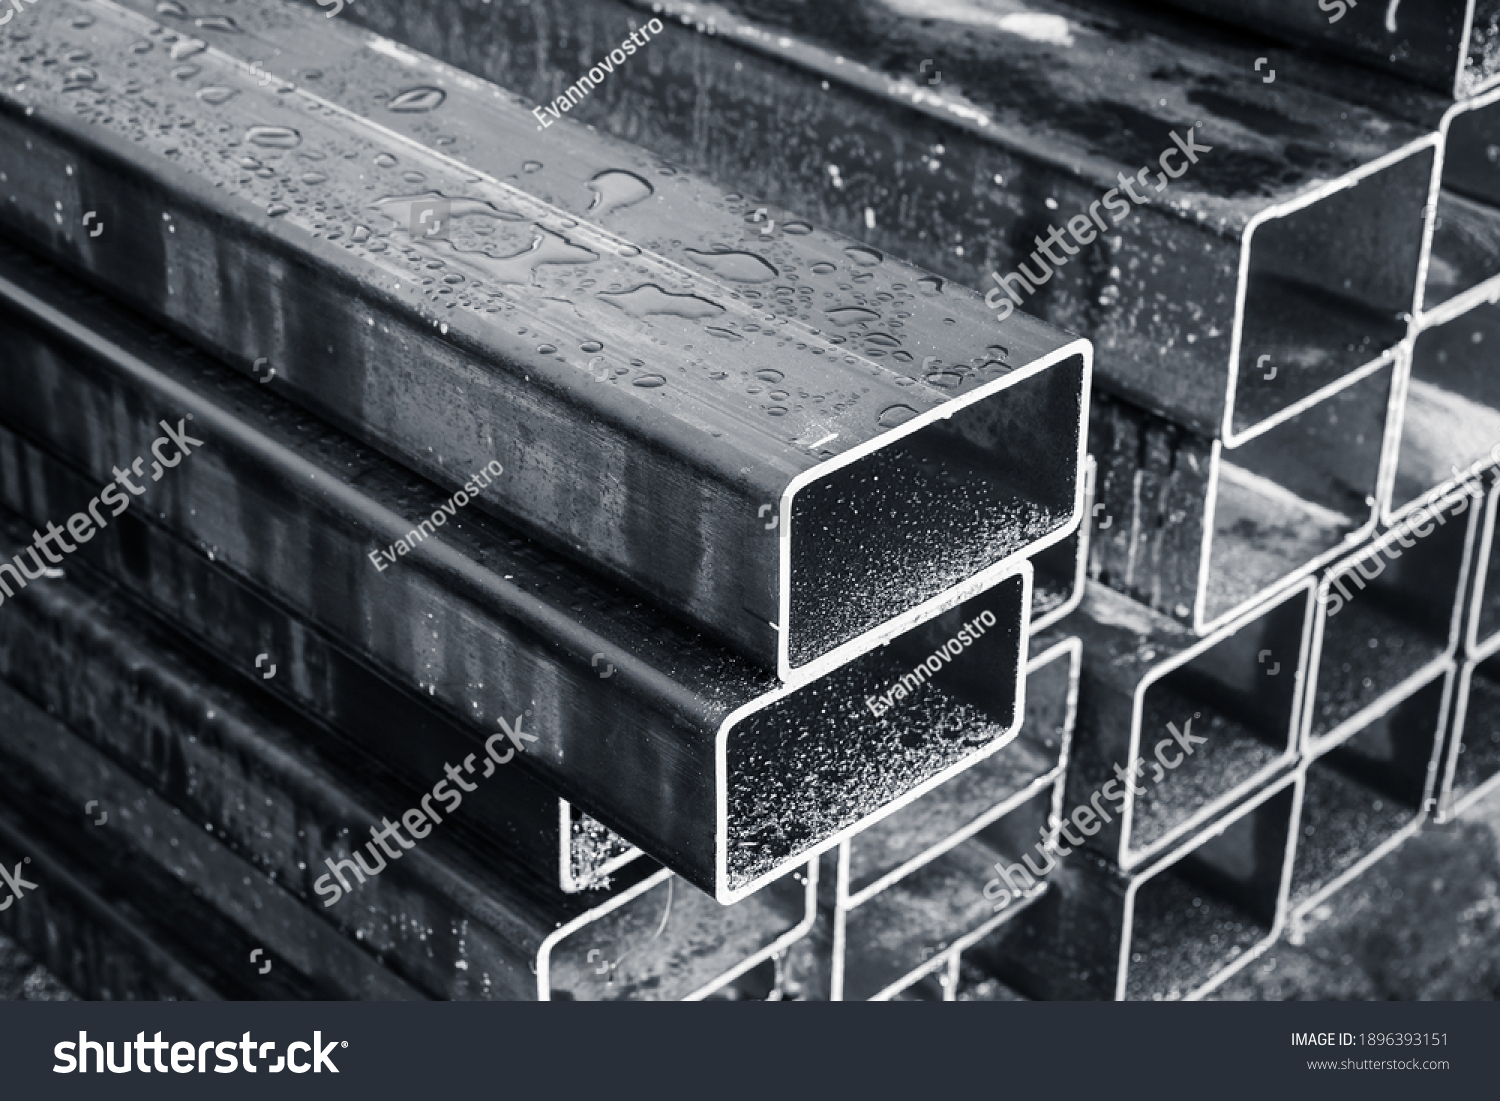 Stacked steel pipes with rectangular cross-section, close-up monochrome photo with selective focus #1896393151